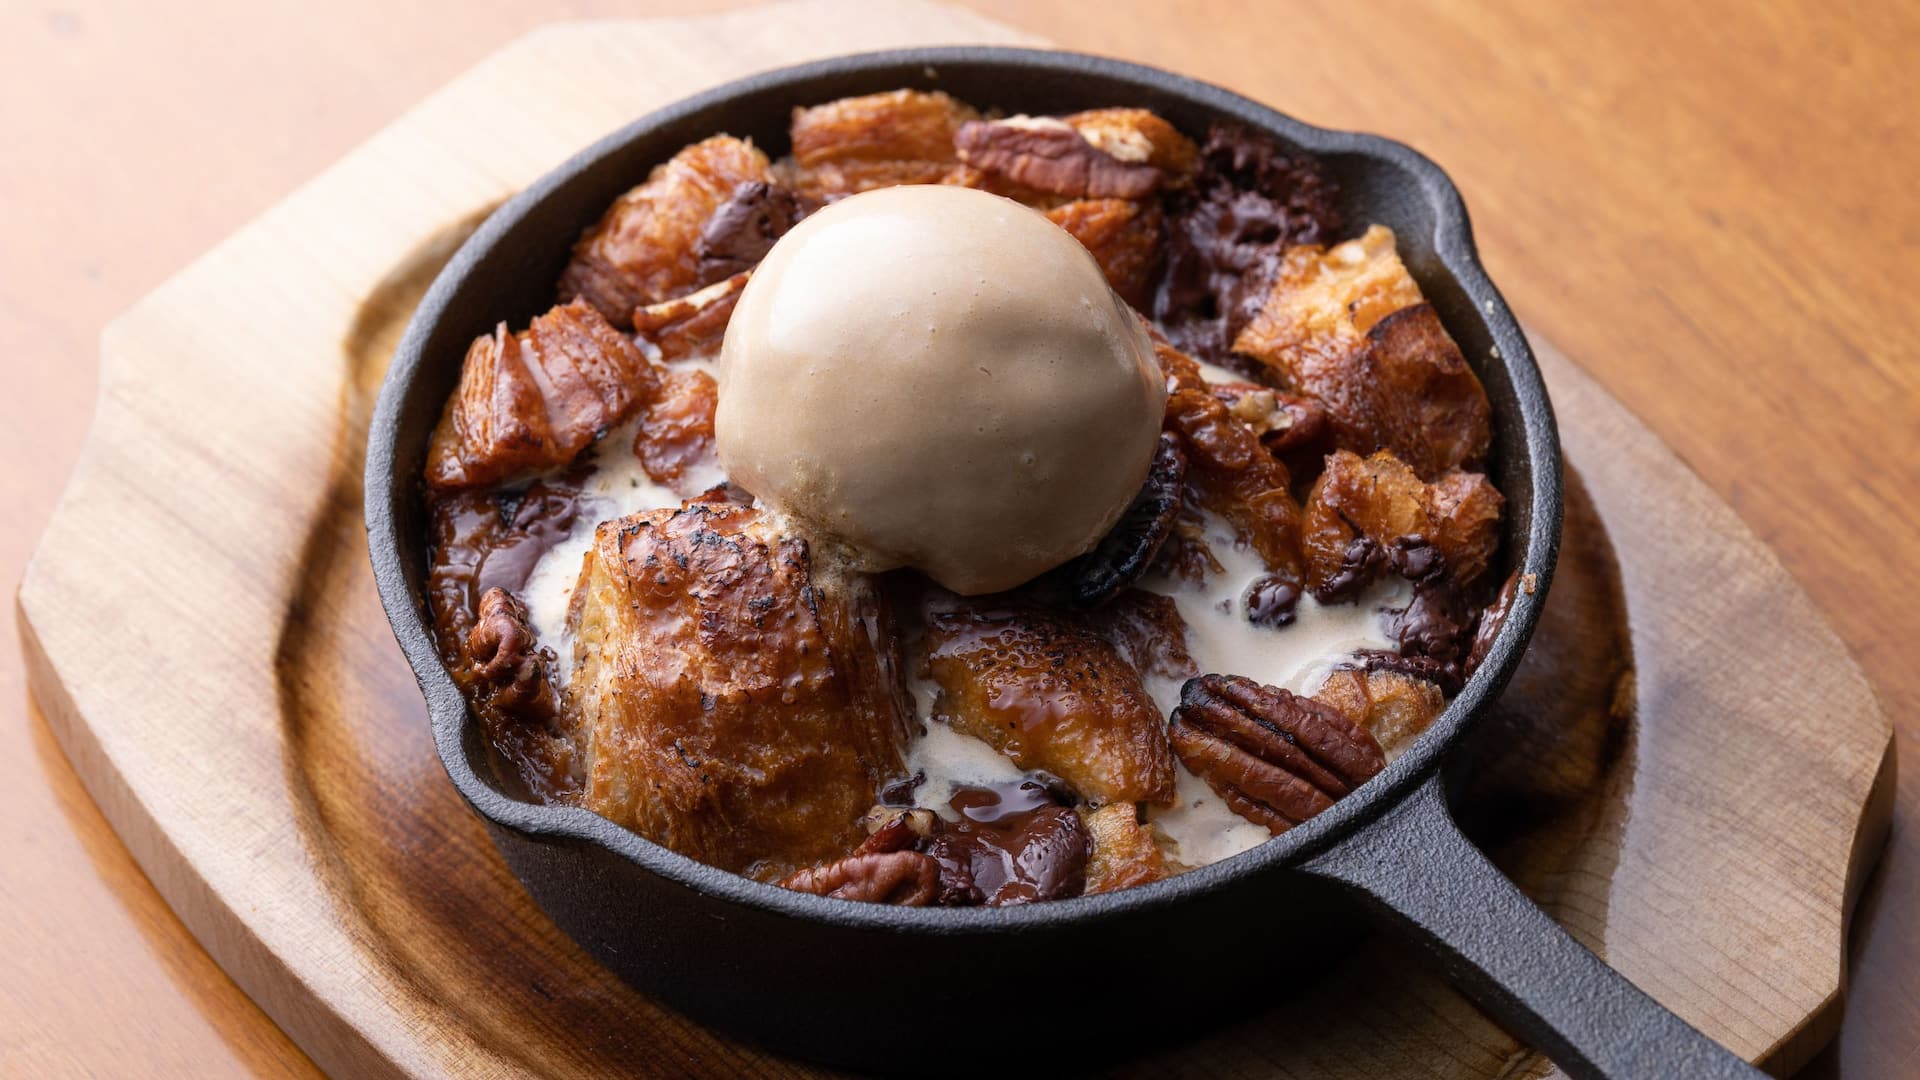 cafe 33 bread pudding